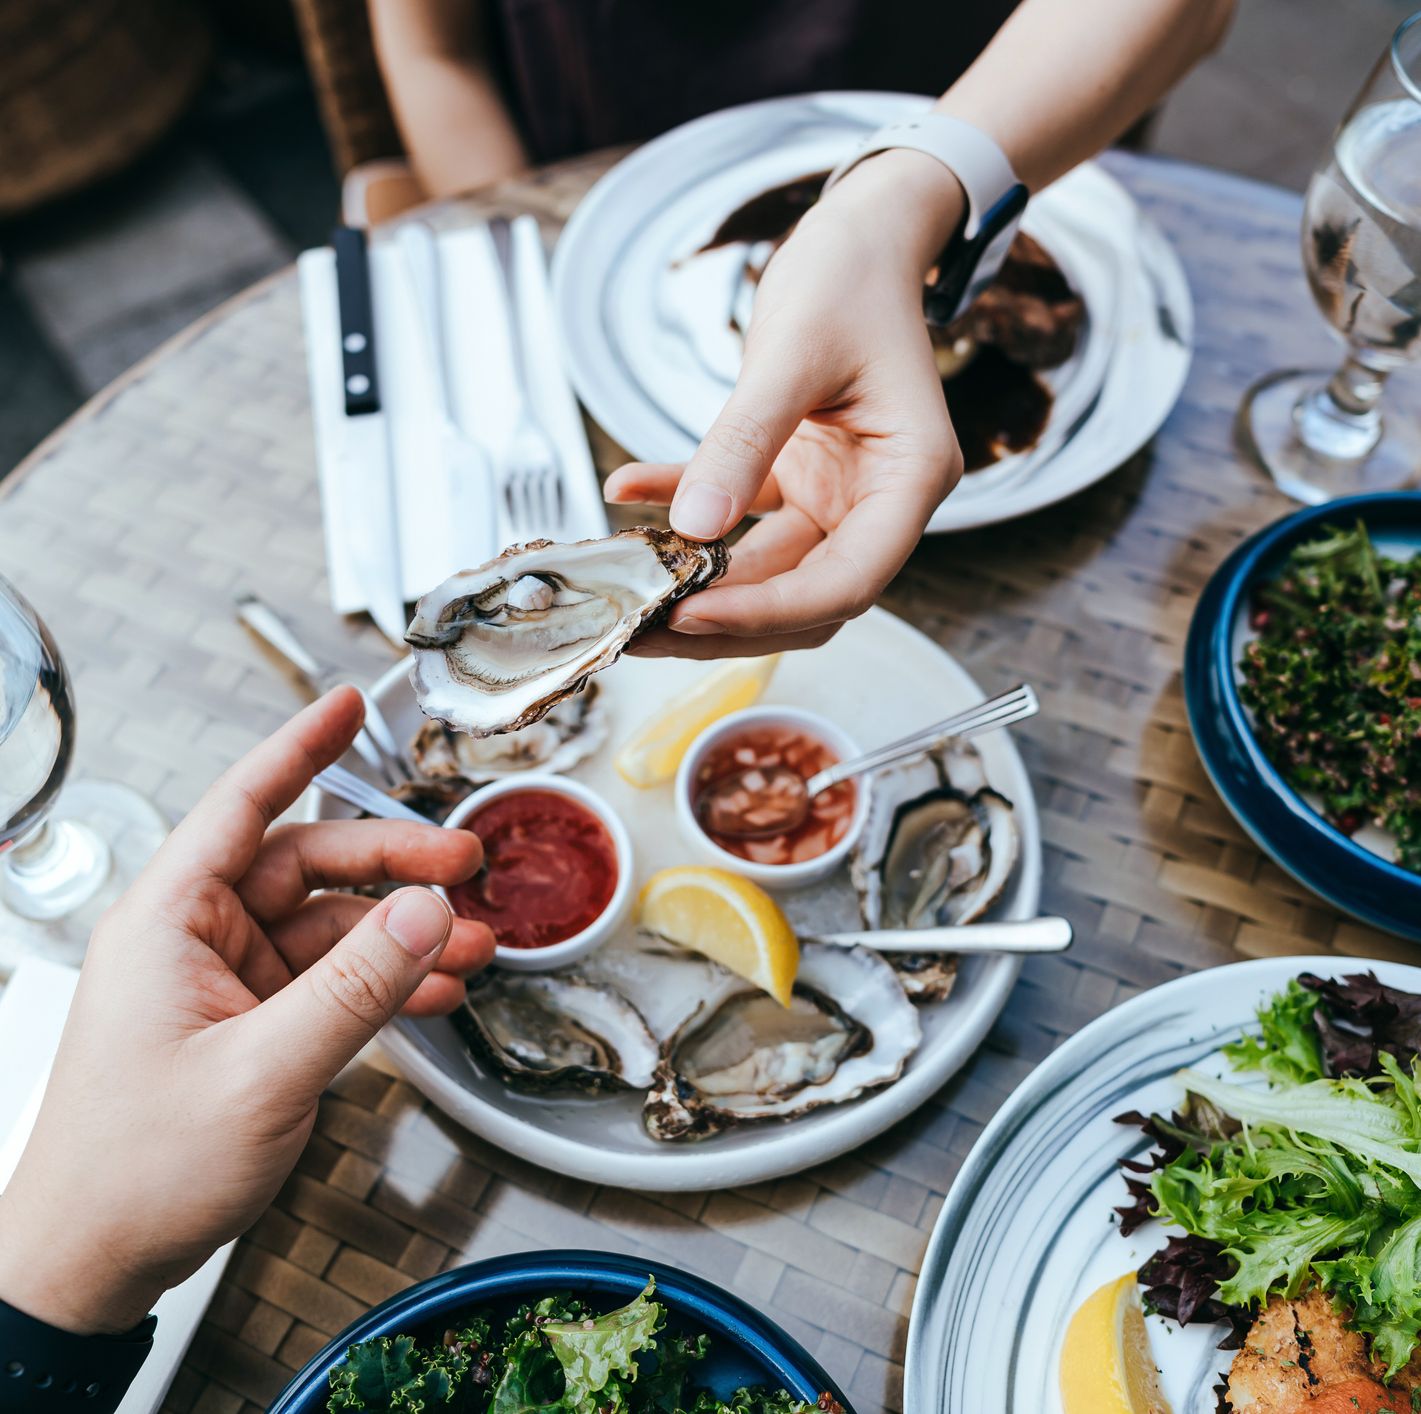 The Pescatarian Diet Is Healthy, Delicious, and Dietitian-Approved